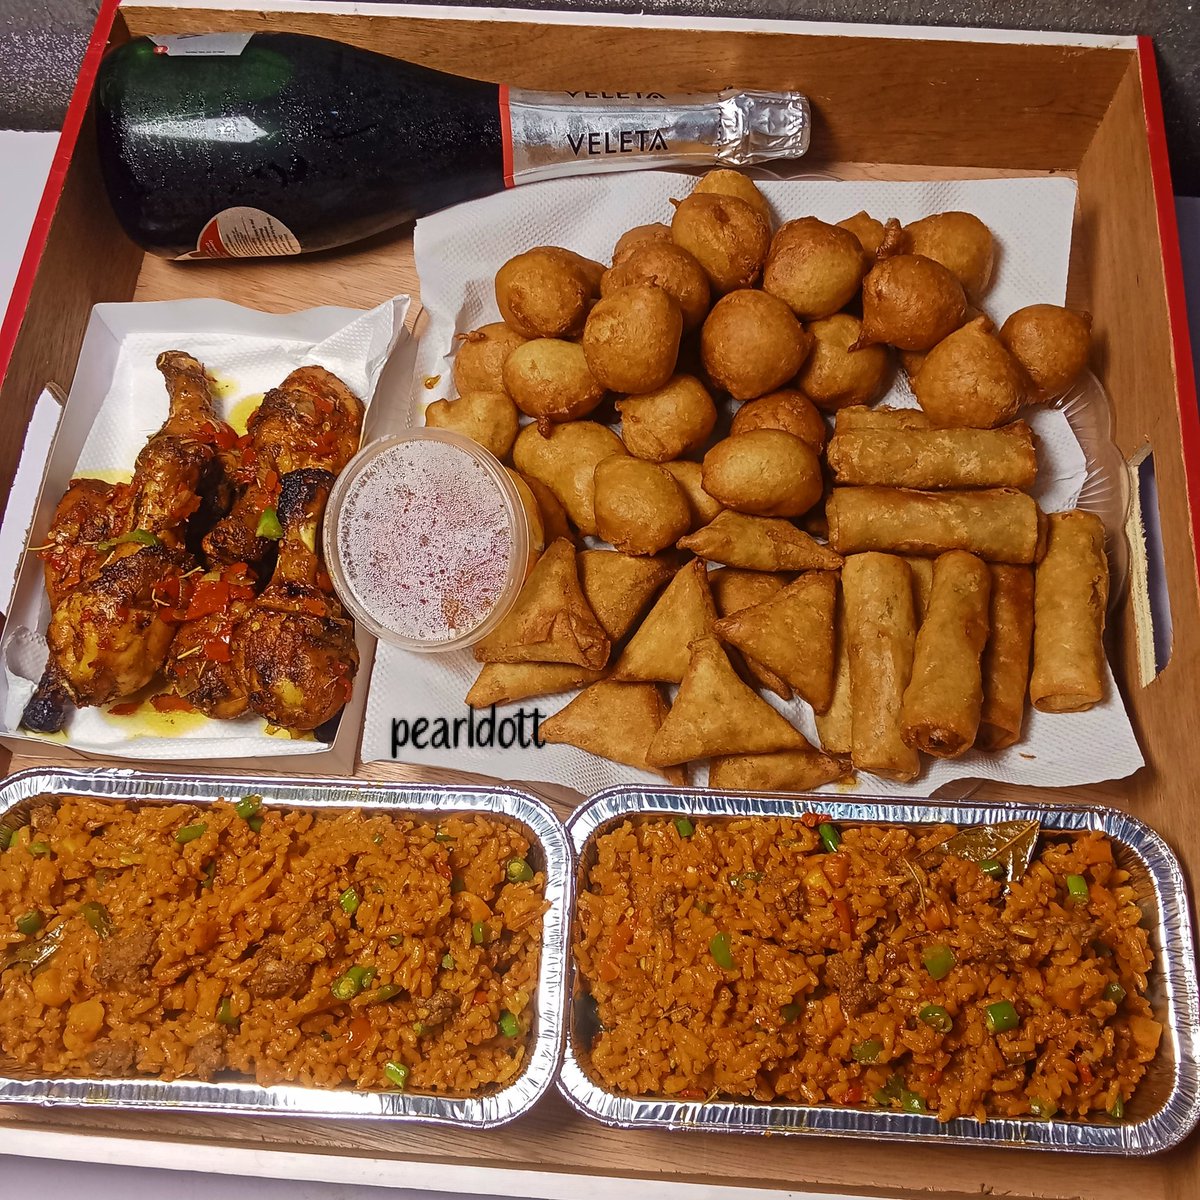 Food platter for a birthday 🎉..

Smallchops
Drumsticks
Minced beef smoky jellof ..

Want a sure plug for legit treat in Asaba, click the link in my Bio to place an order

✍️Cakediva.

#pearldott #suprisesinasaba #foodtrayinasaba #smallchopsinasaba #asababaker #cakesinasaba